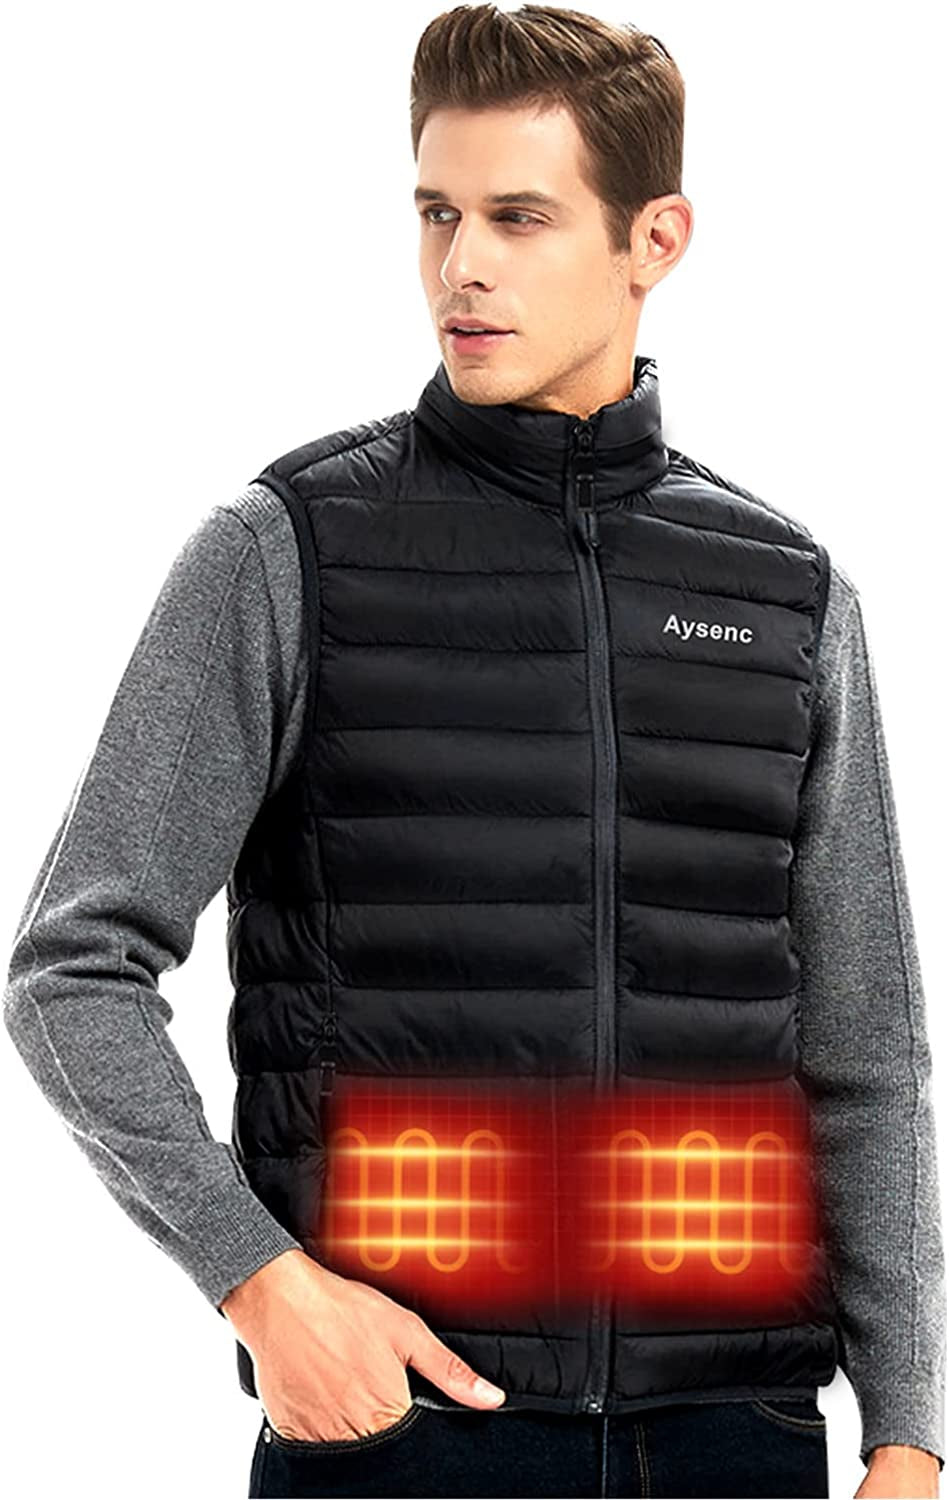 Unisex Heated Vest for Men and Women - 3 Modes, 9 Heating Pads